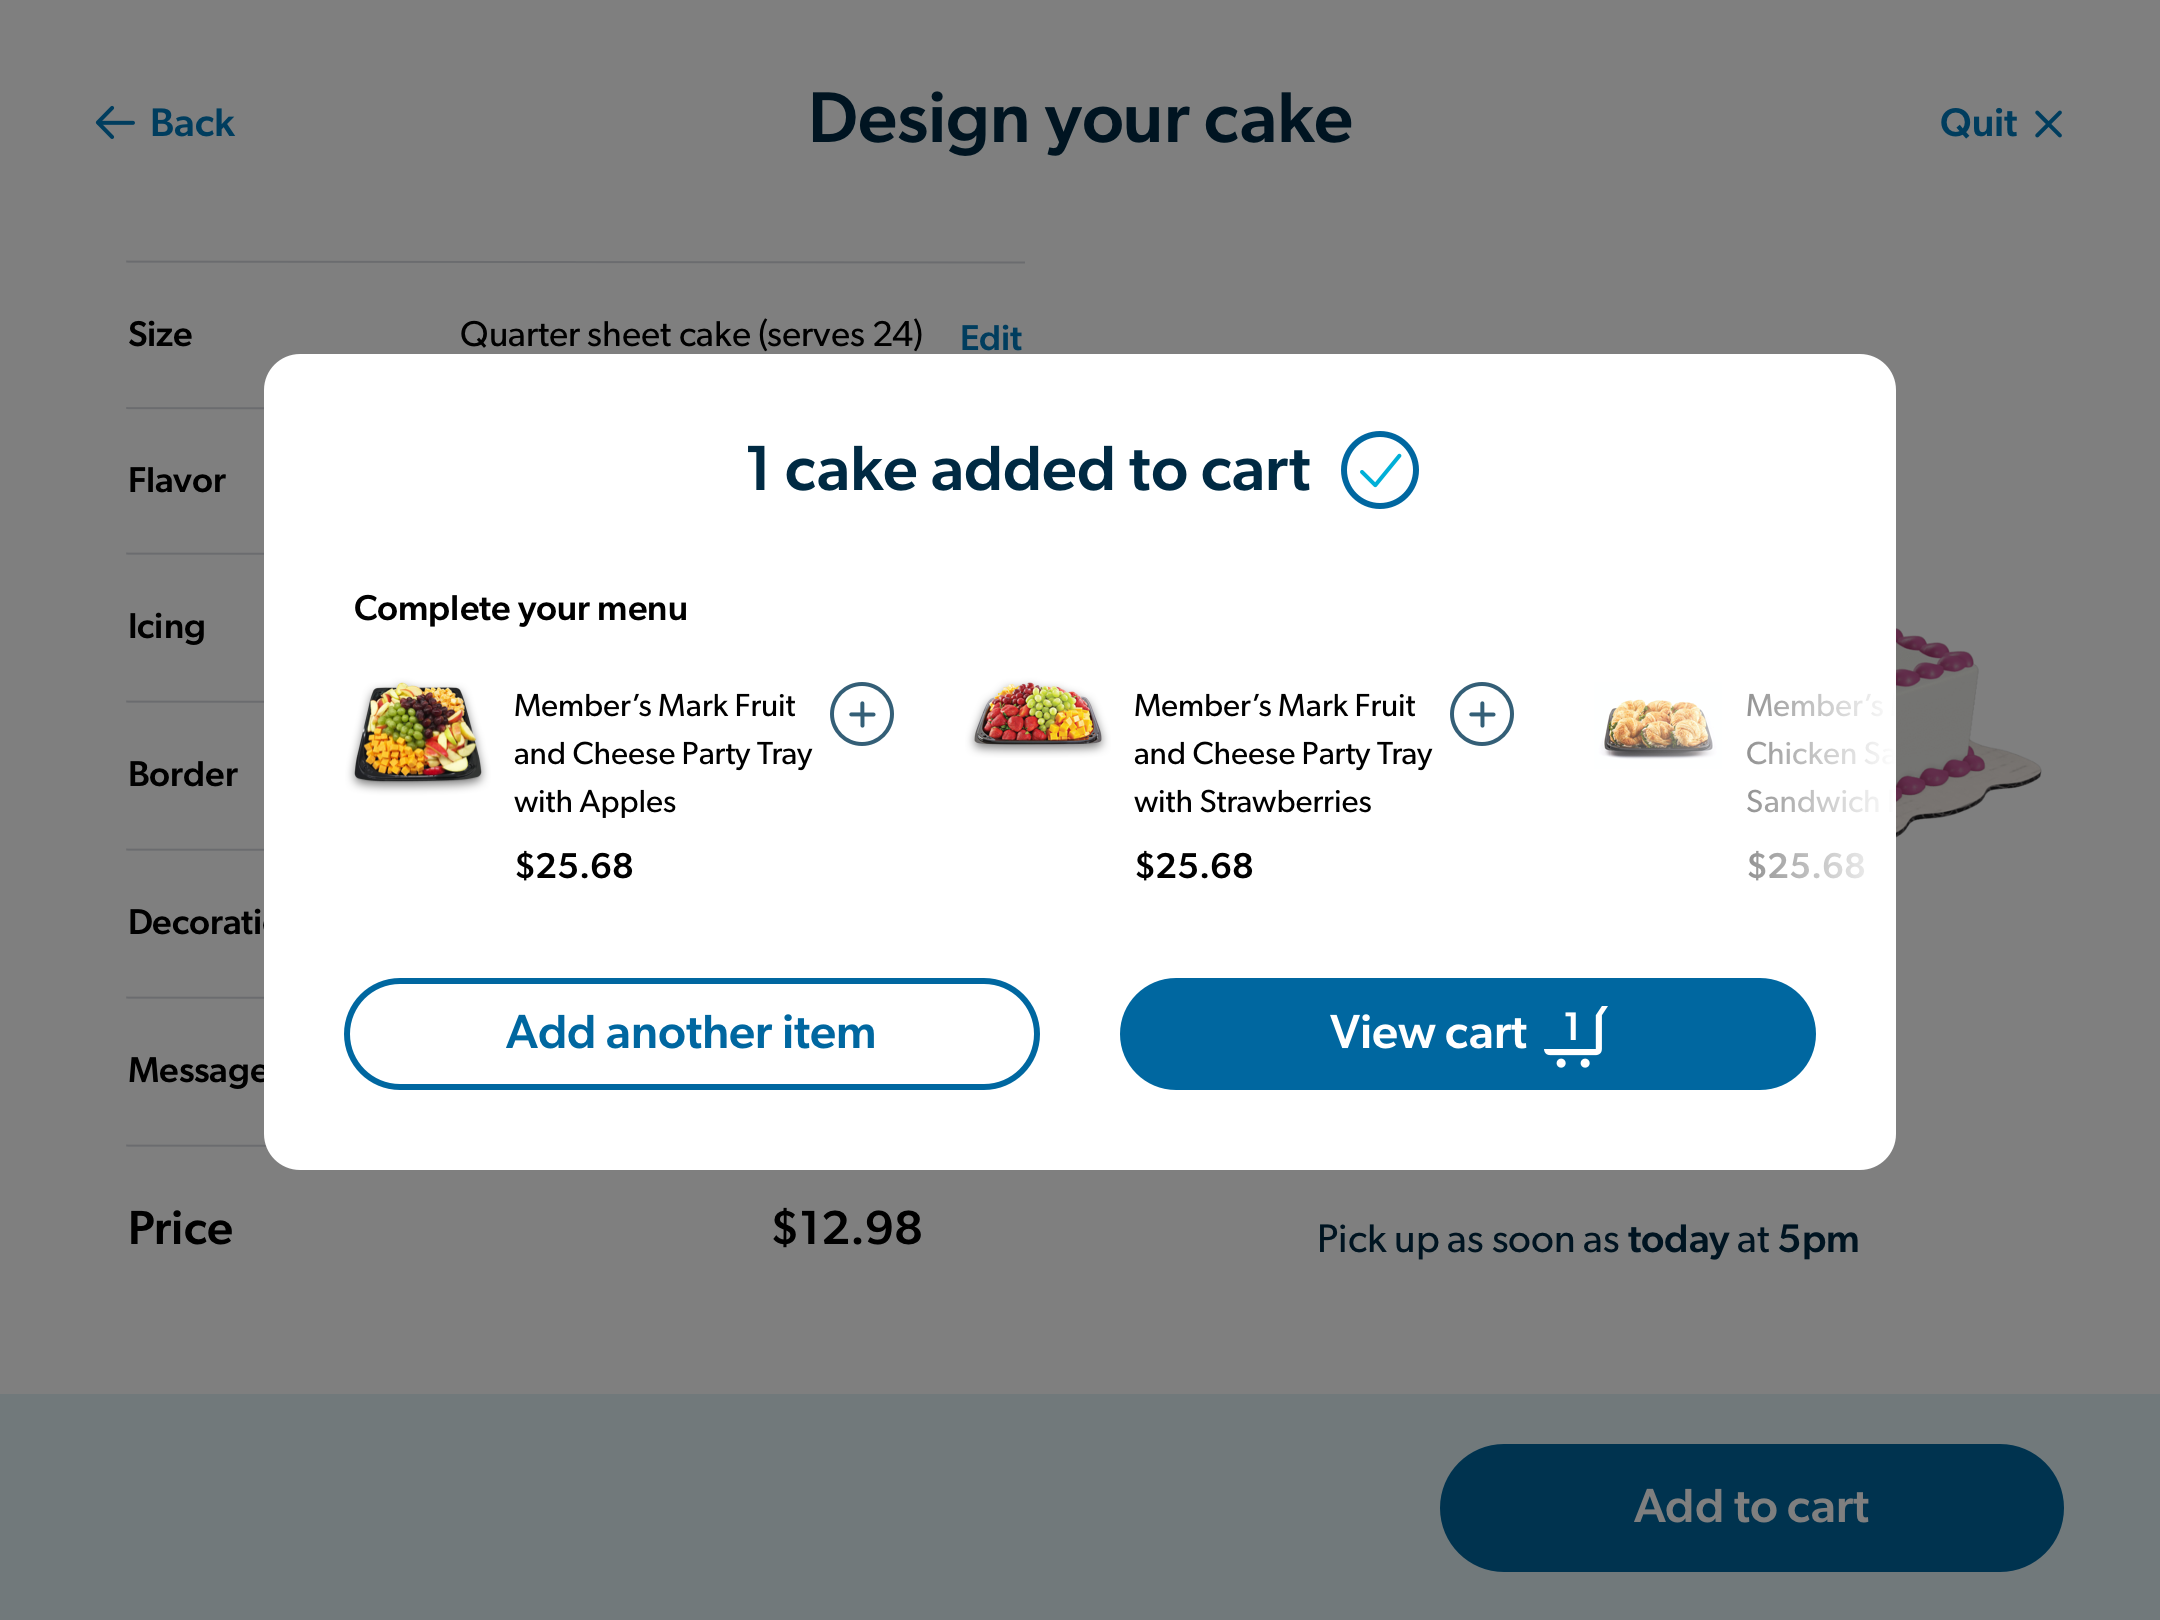 Cake added to cart. Complete your menu with another suggested bakery/deli item